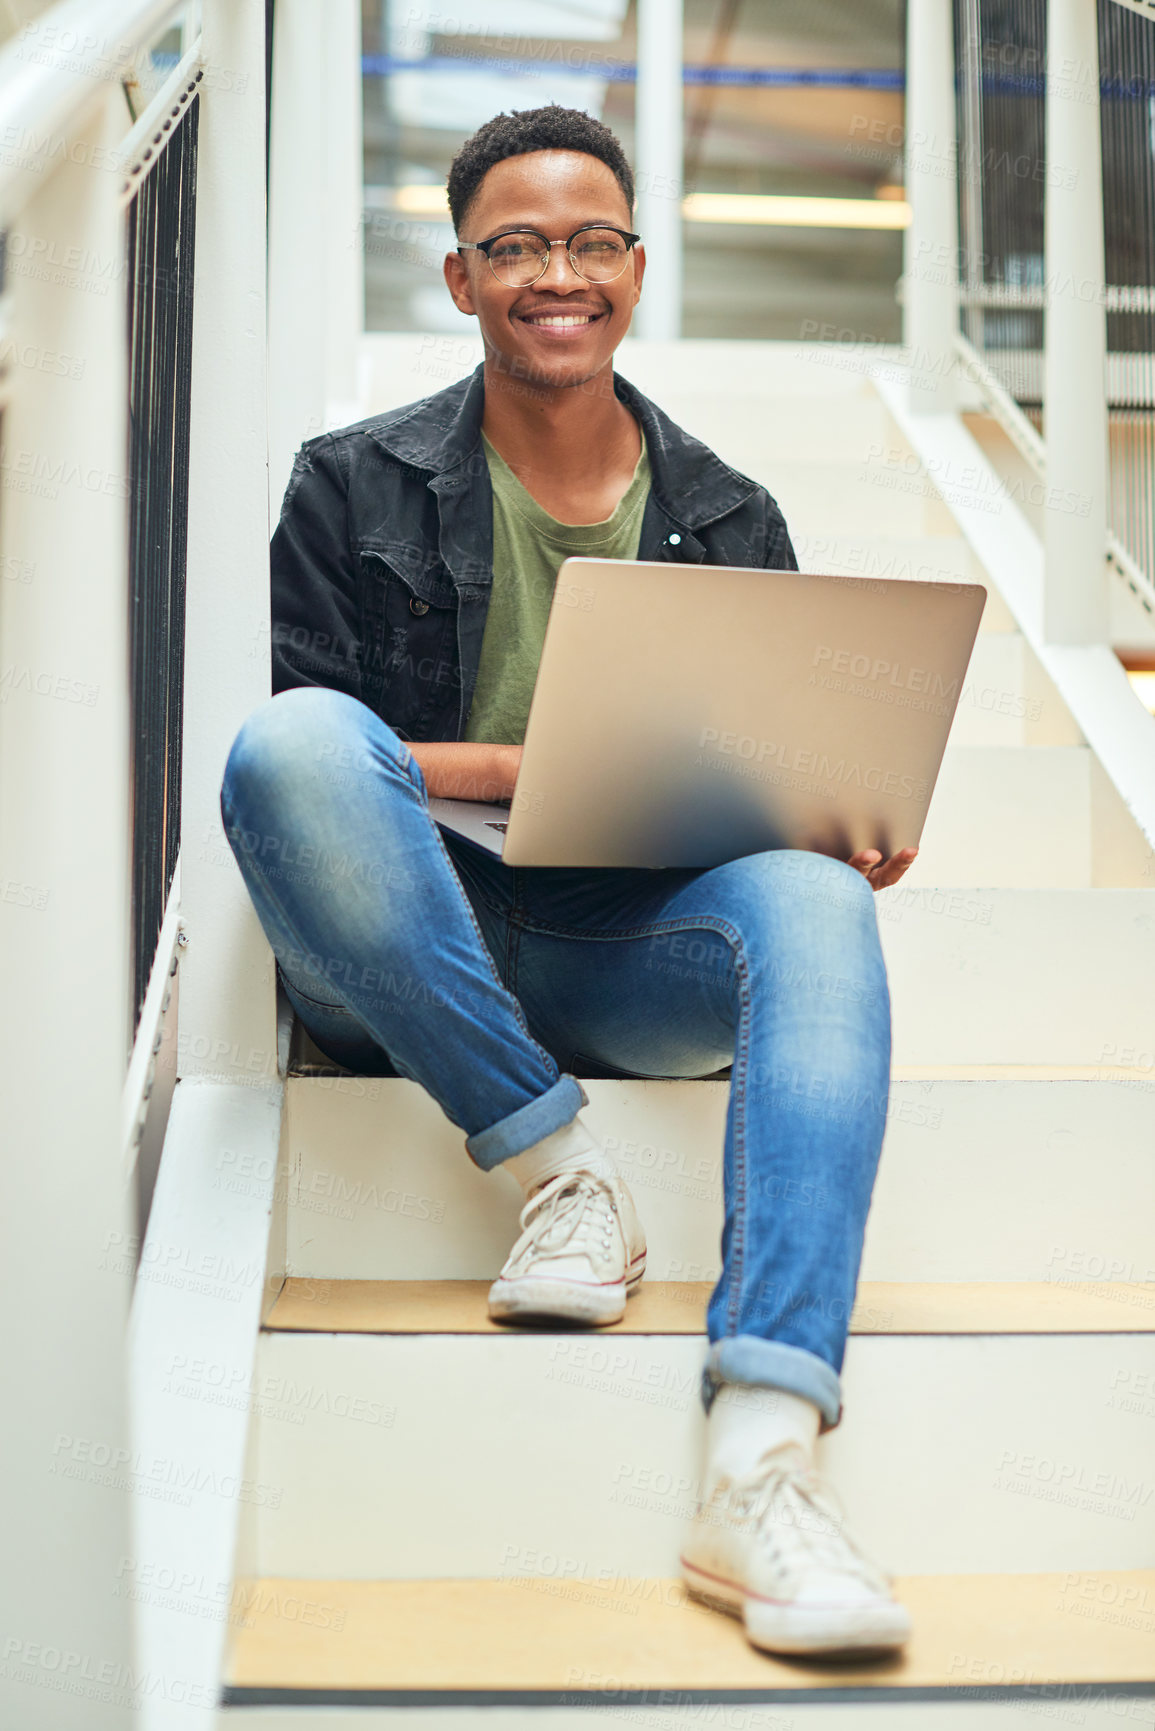 Buy stock photo Shot of a young businessman using a laptop on the stairs of a modern office